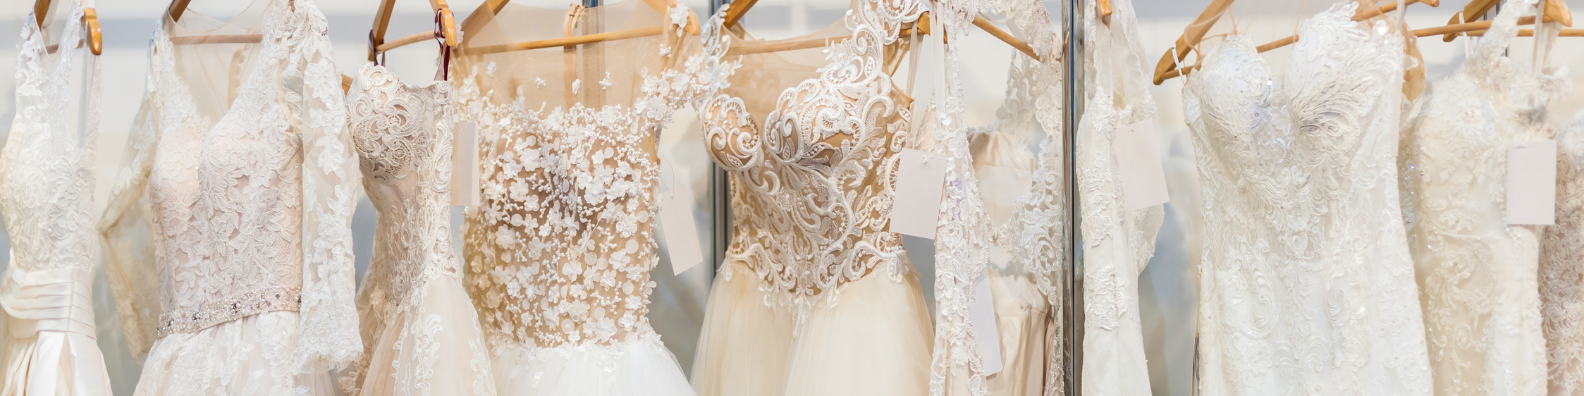 Wedding Dress Chicago: Your Perfect Gown Awaits